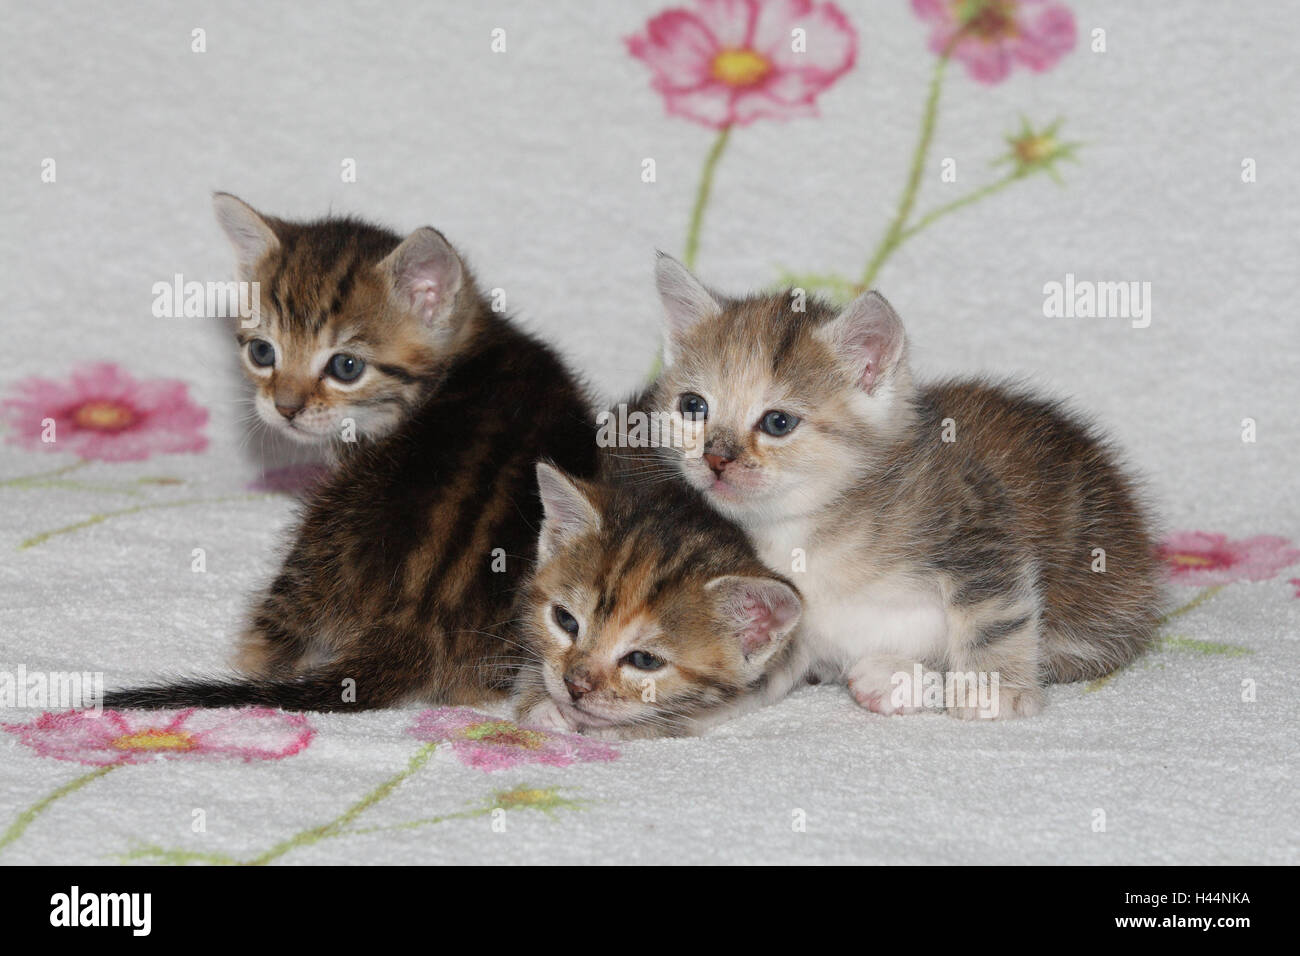 Cats, young, lie, zusammenkuscheln, bed, animals, mammals, pets, small cats, Felidae, domesticates, house cat, young animal, kitten, three, behaviour, cuddle, doze together, siblings, small, affectionately, awkward, clumsy, sweetly, striped, love, suture, tiredly, cohesion, affection, togetherness, young animals, animal babies, inside, Stock Photo